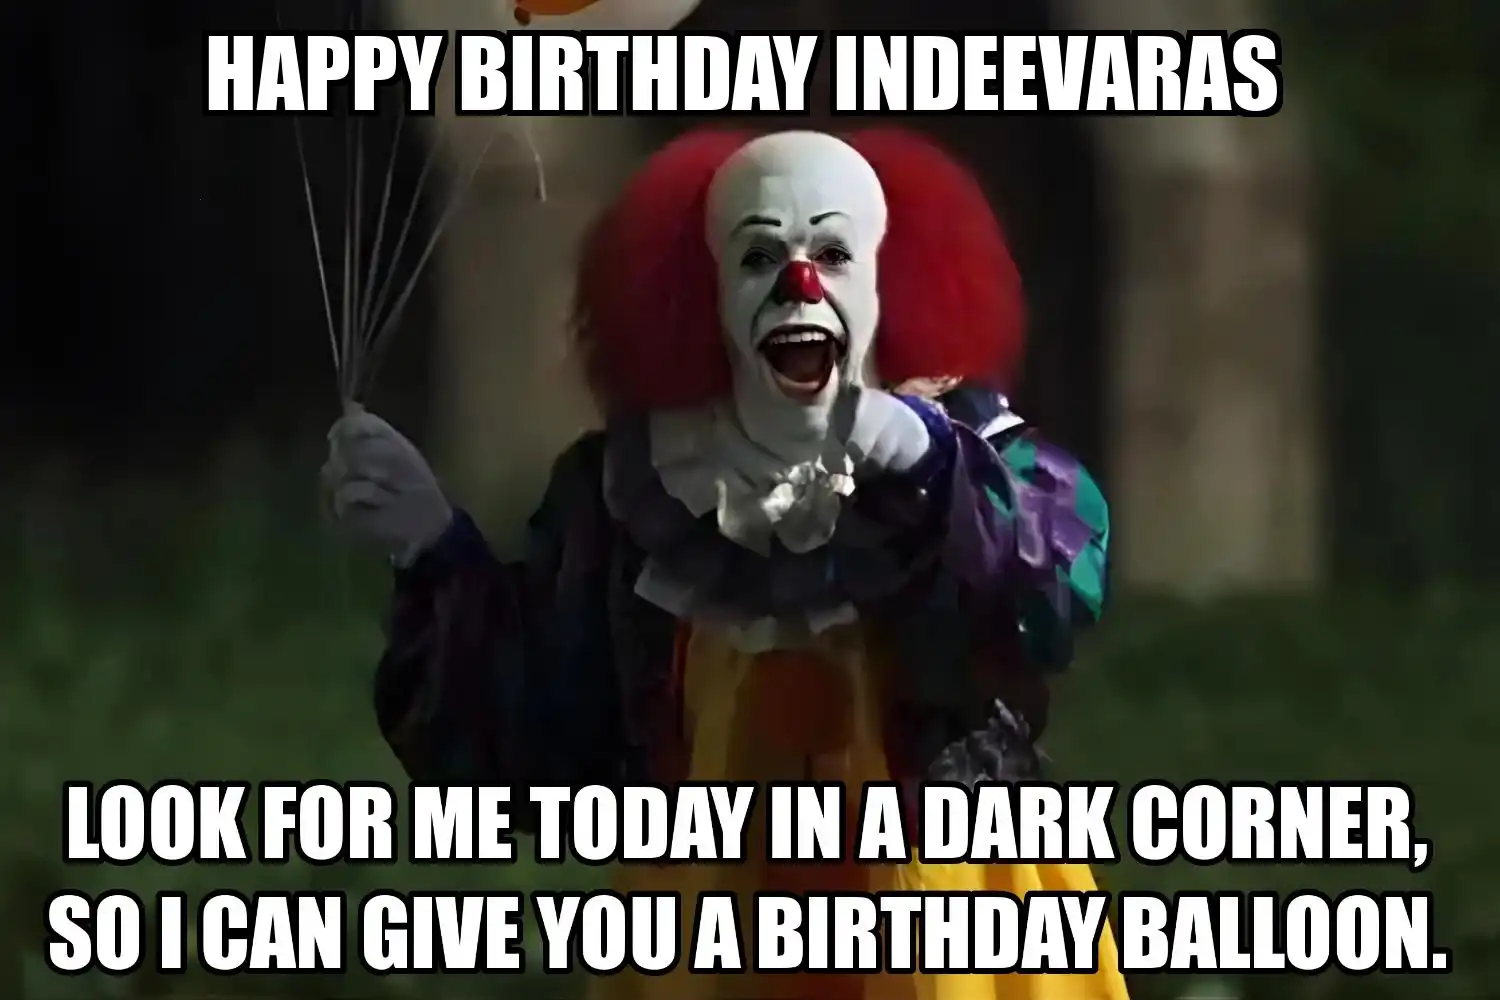 Happy Birthday Indeevaras I Can Give You A Balloon Meme